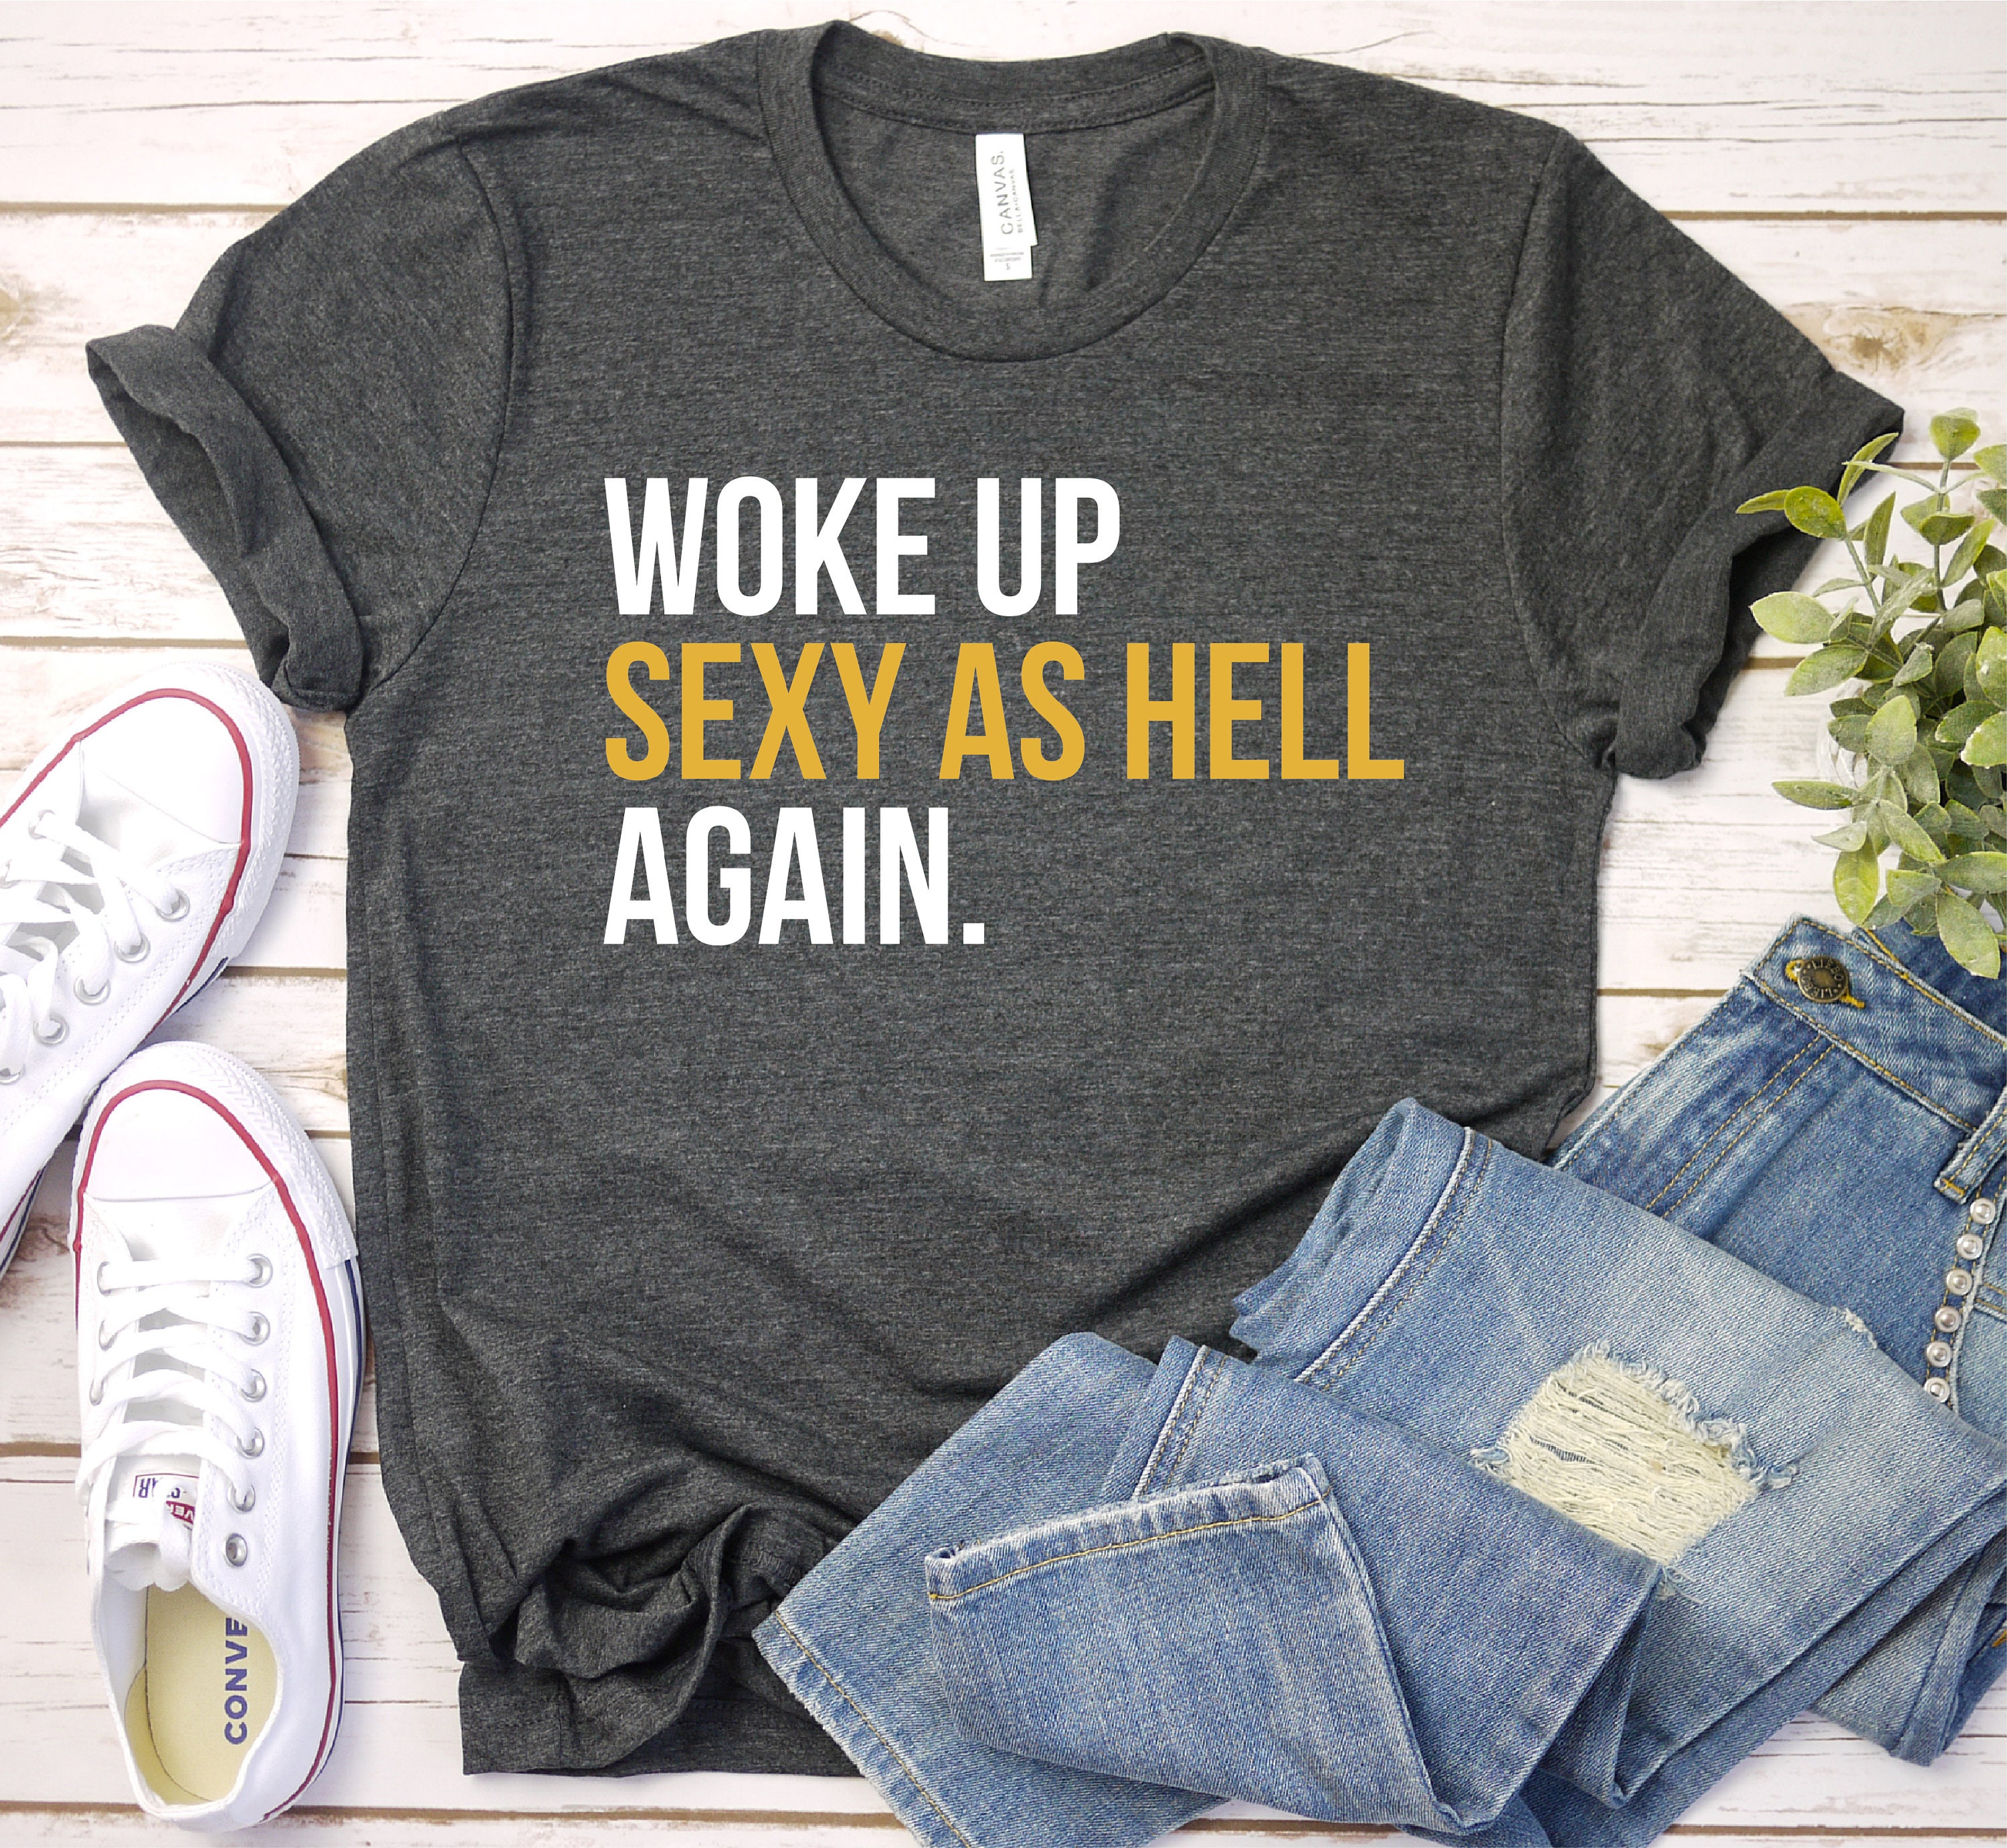 Funny Sarcastic Shirts Woke Up Sexy As Hell Again Shirts For Etsy